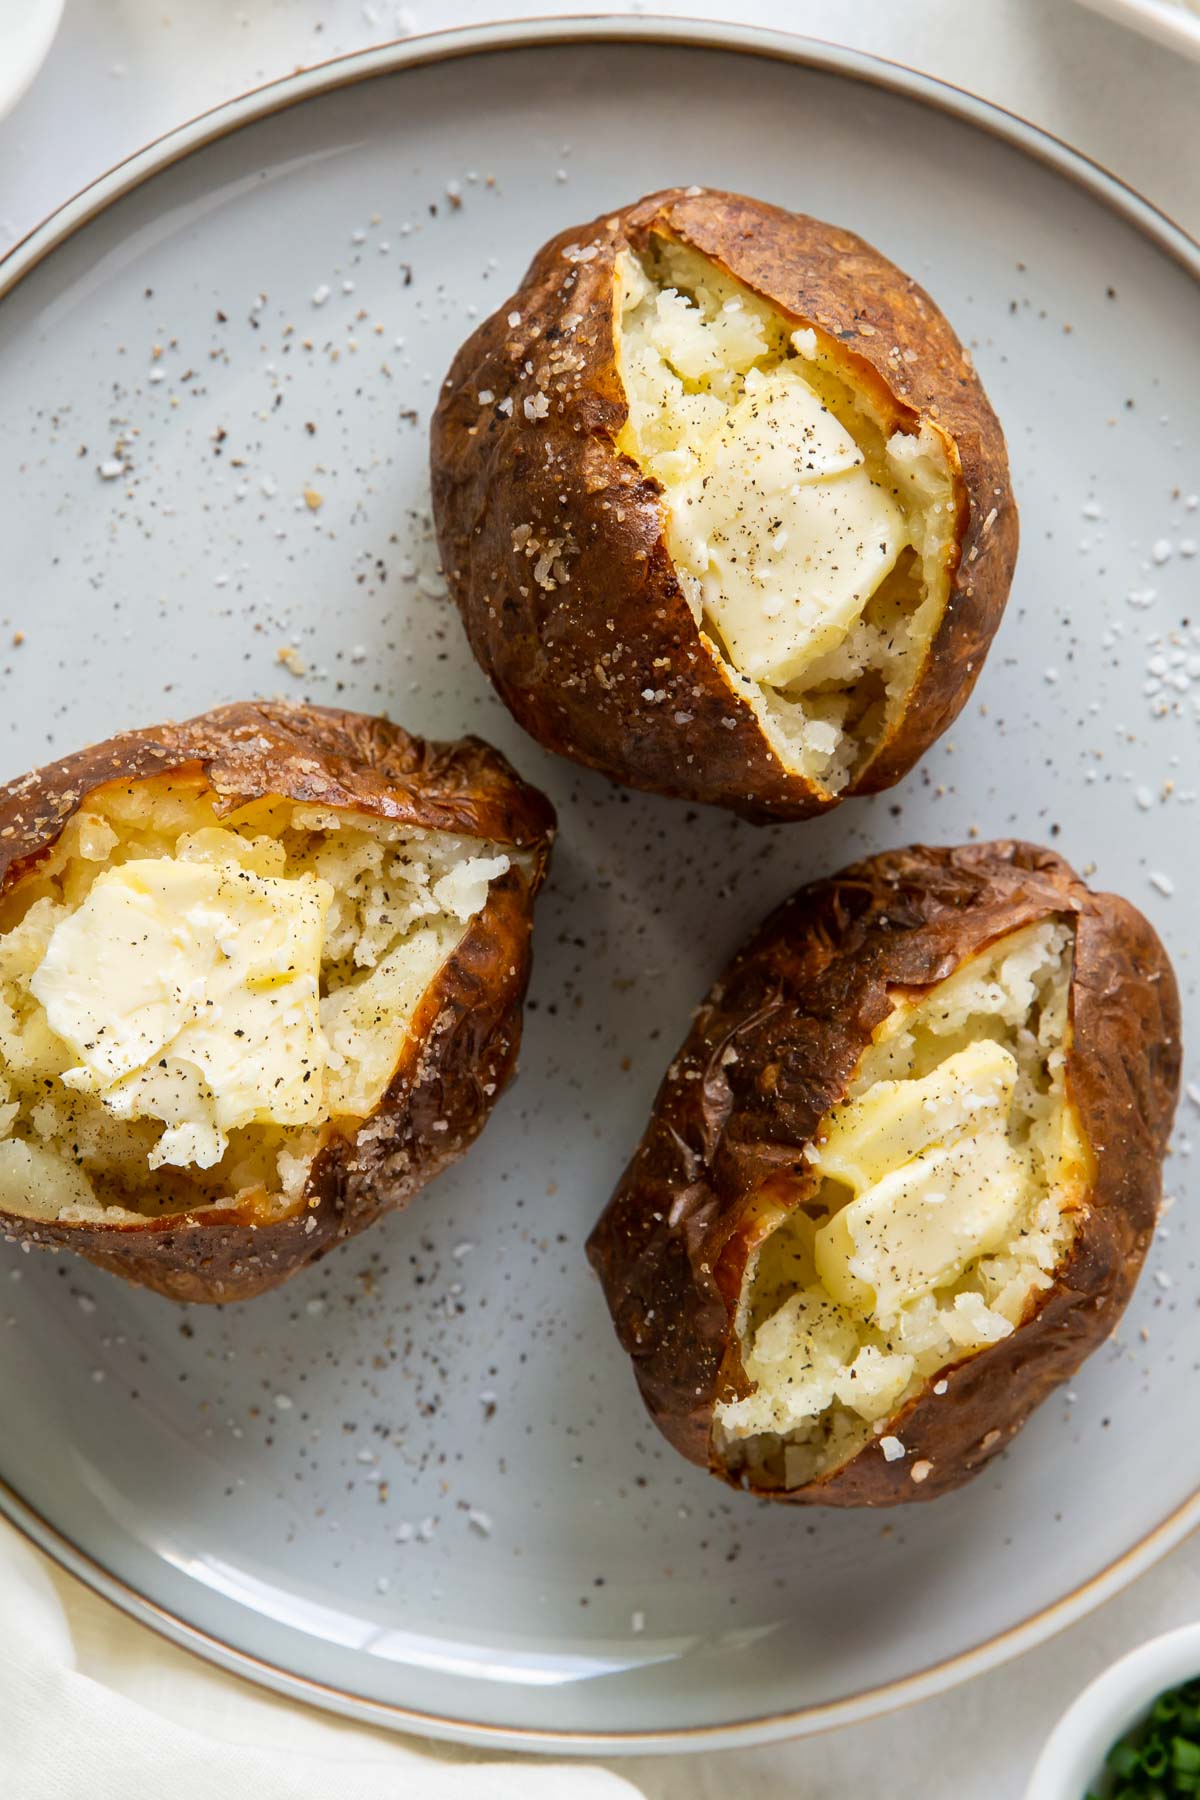 Three baked potatoes topped with butter, salt and pepper on a plate.